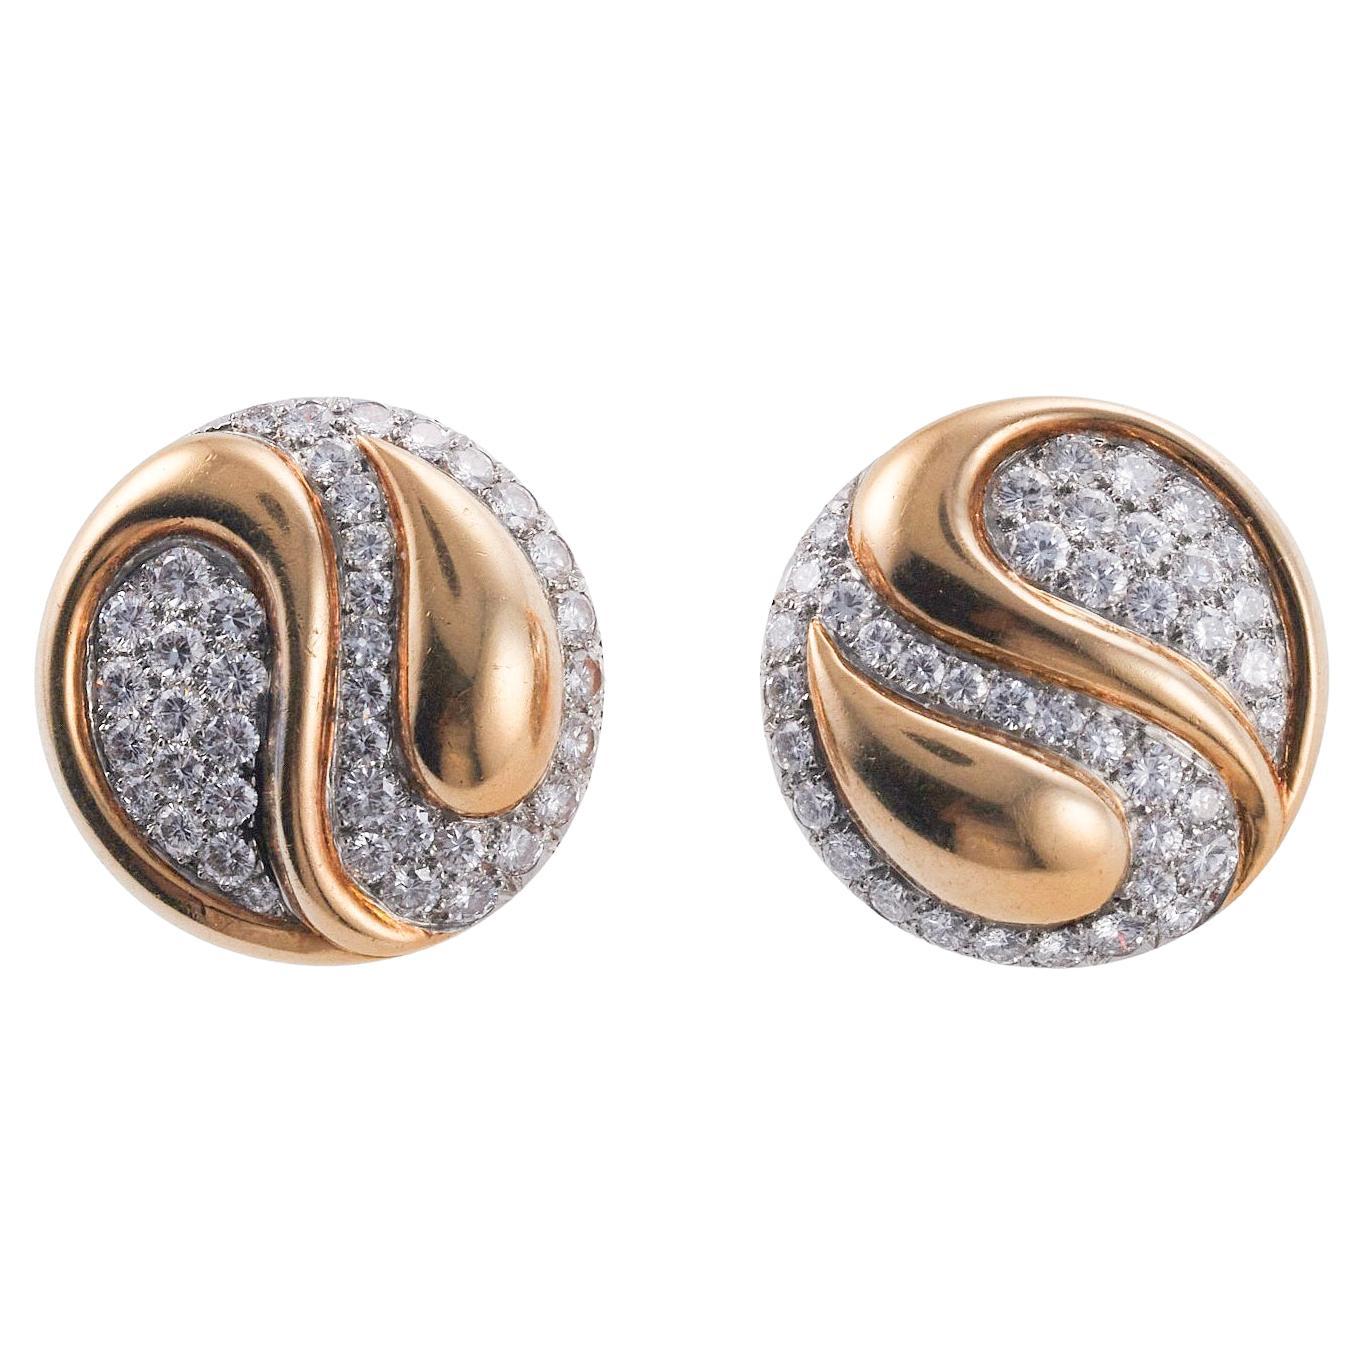 Van Cleef & Arpels France Diamond and Gold Button Earrings For Sale